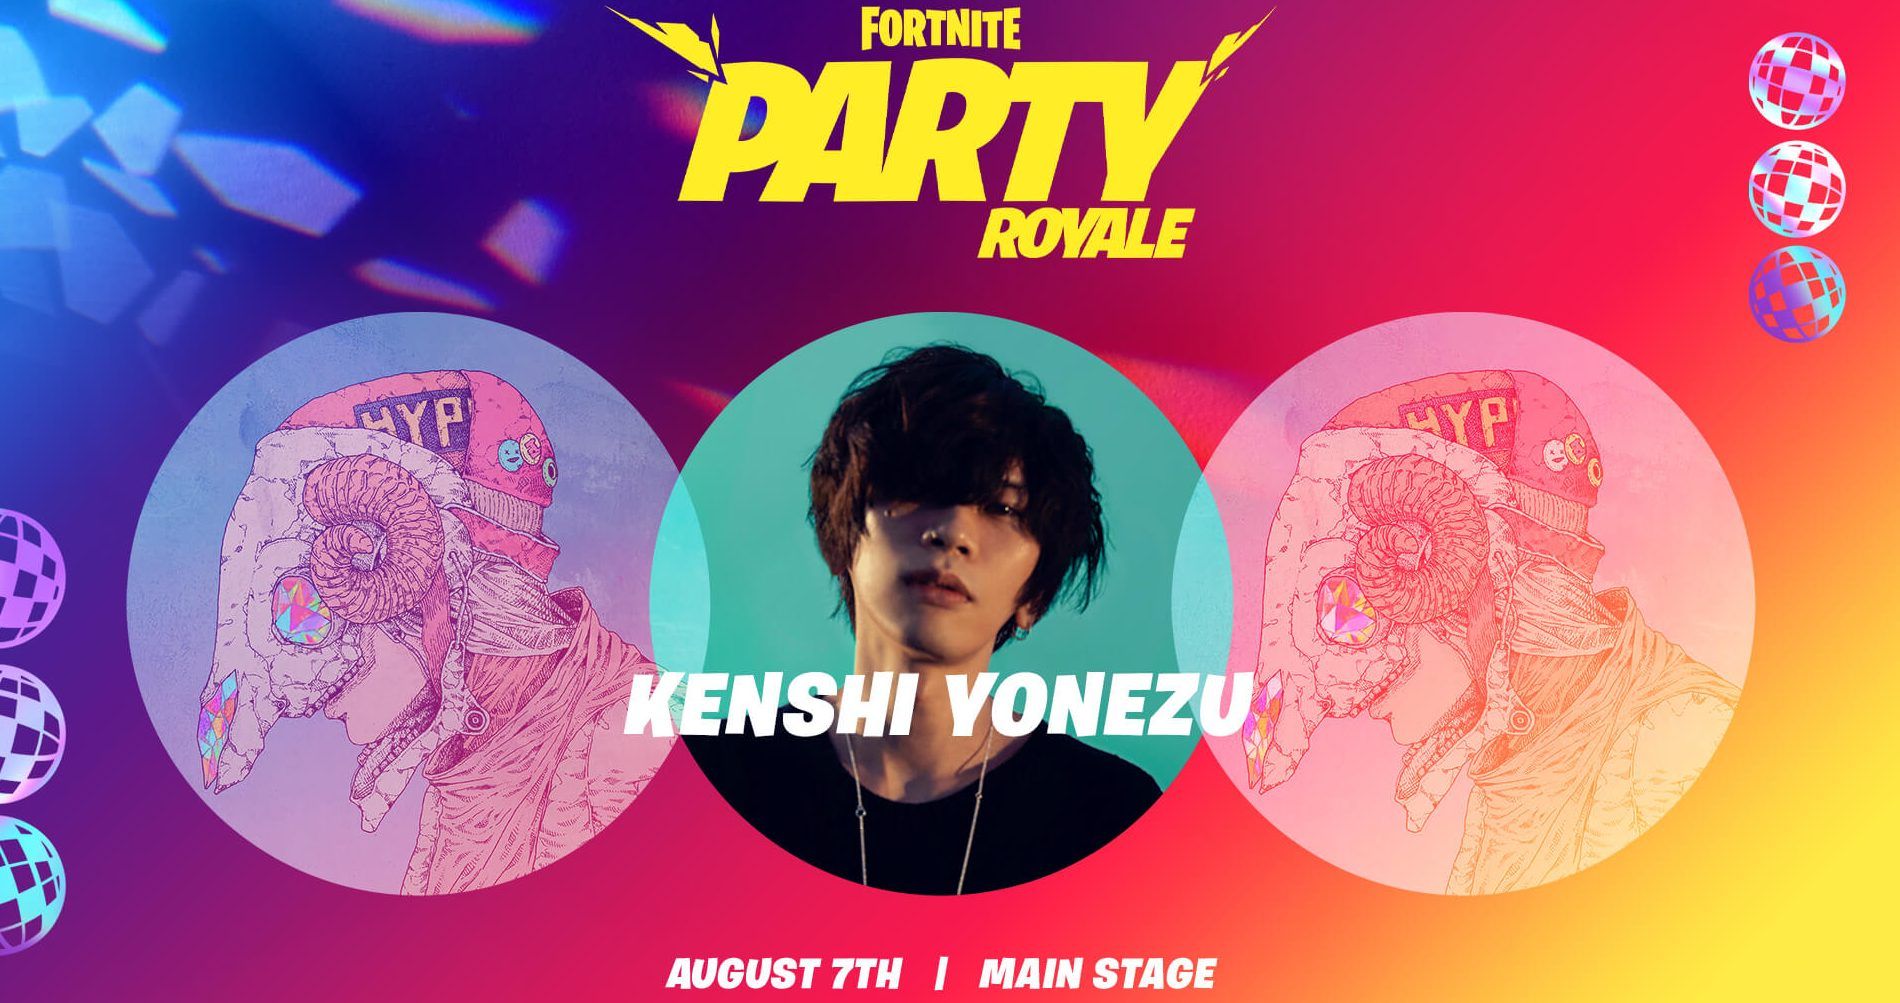 Every famous song of Kenshi Yonezu you need to know  Video lyrics  translation